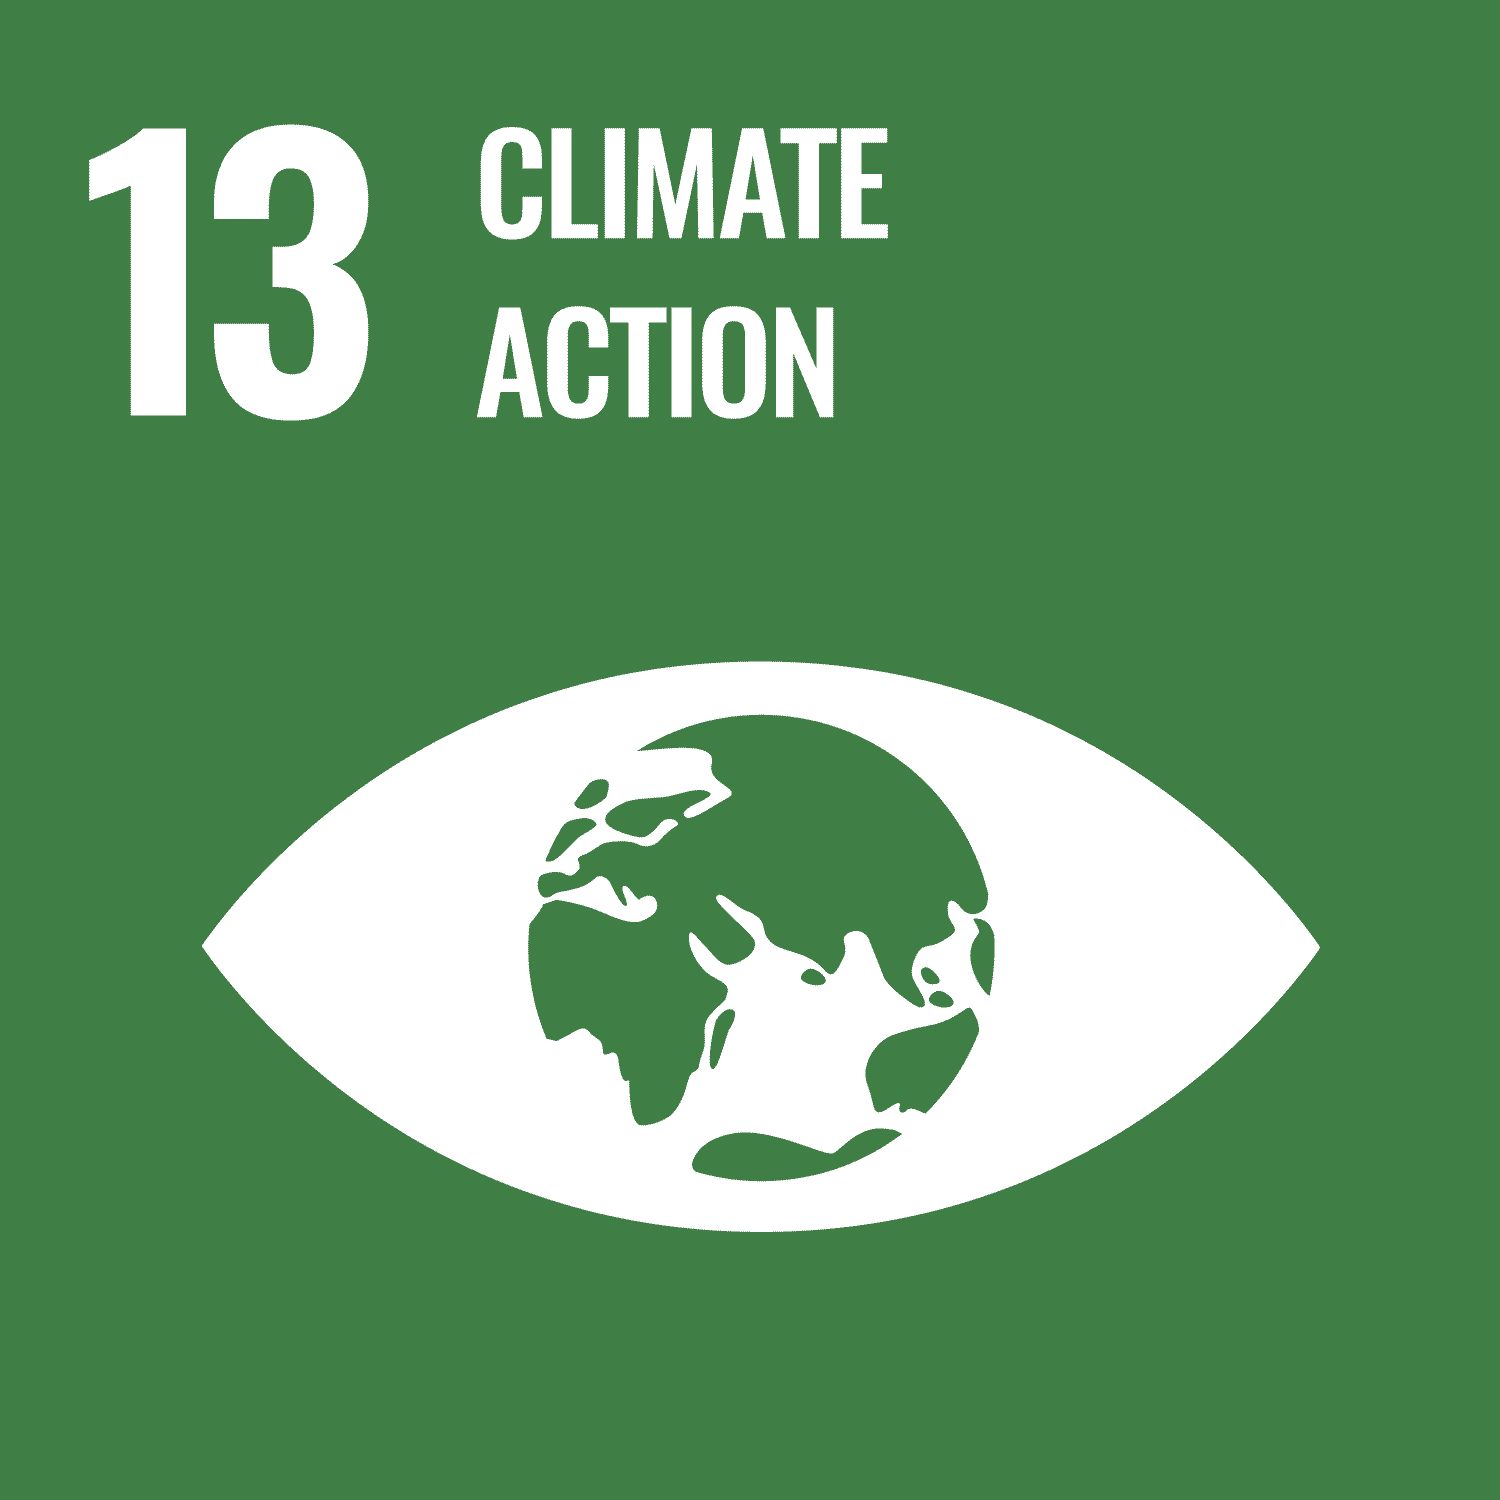 Sustainable Development Goals (3), carbon offsetting